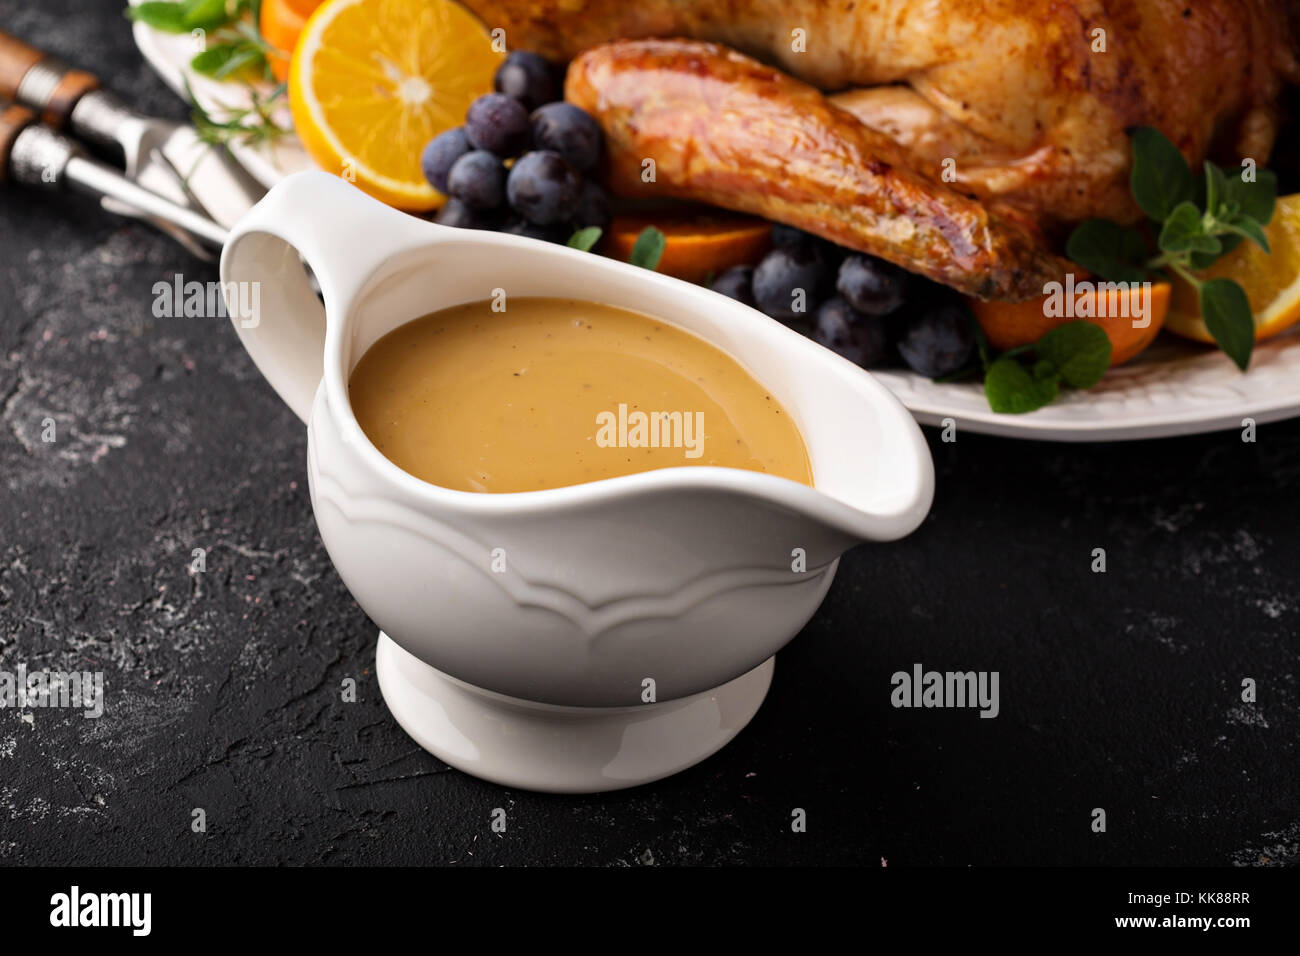 Homemade gravy in a sauce dish with turkey Stock Photo